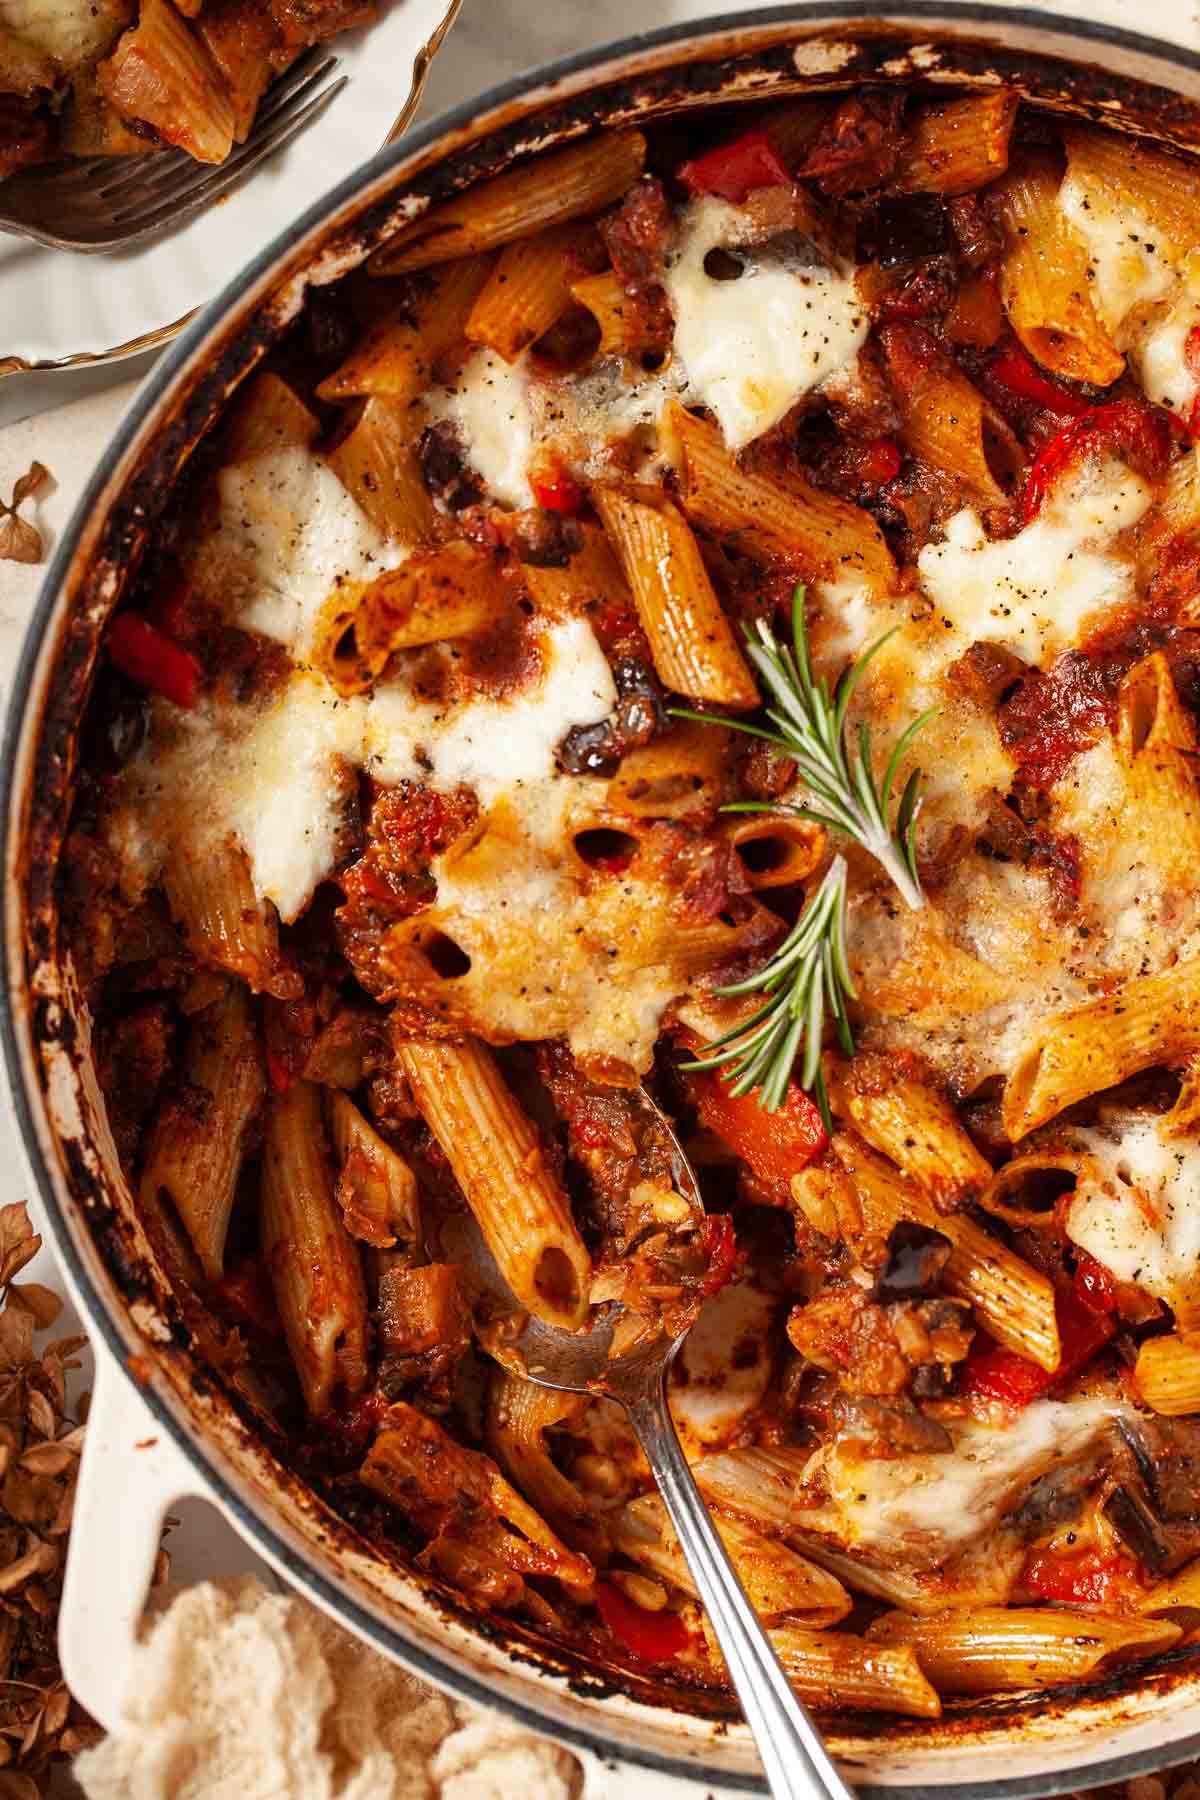 Baked Pasta with Aubergine